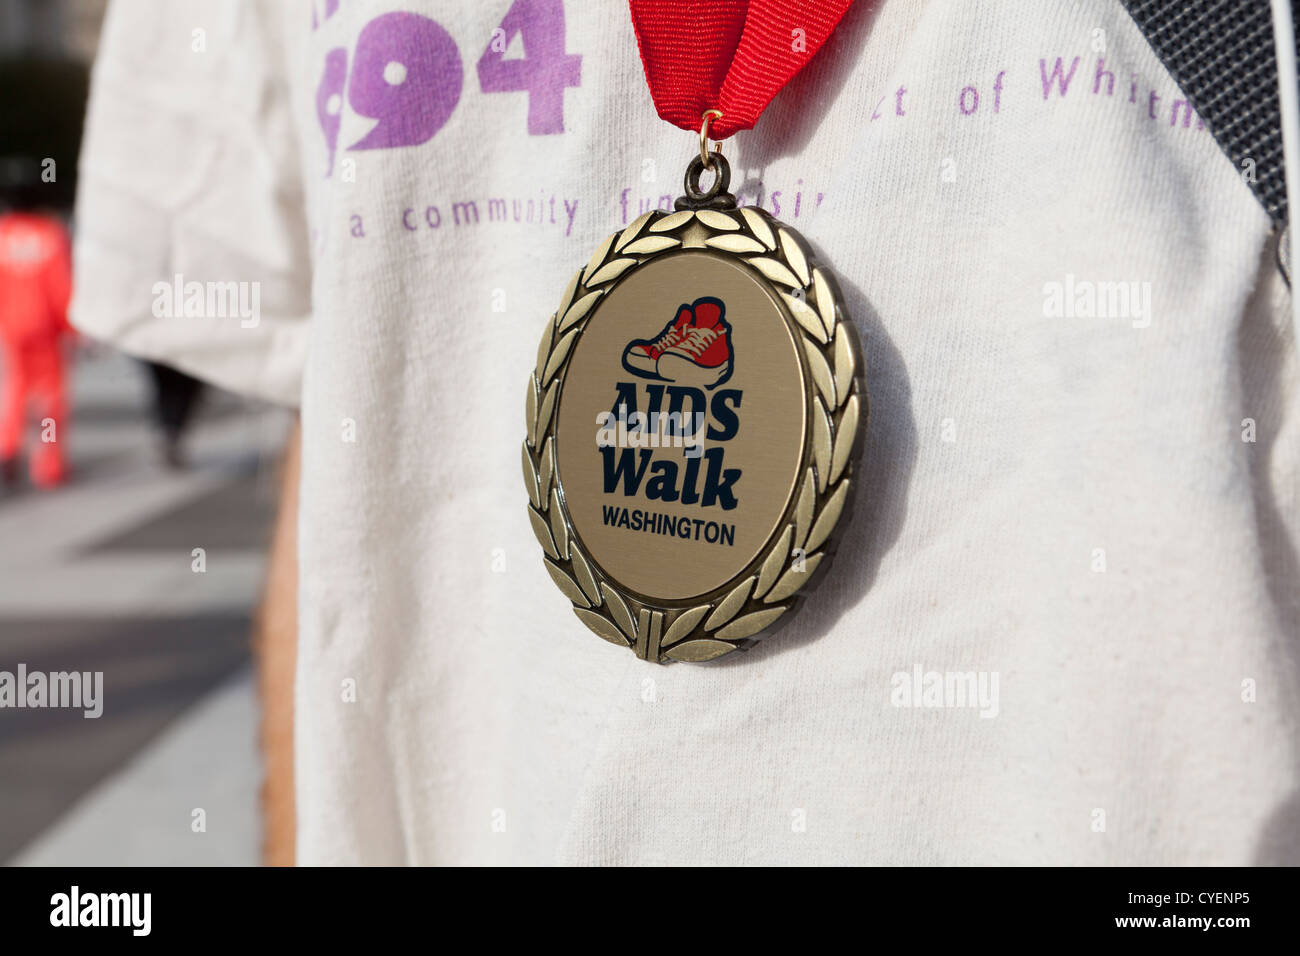 Nationale AIDS Walk-Medaille Stockfoto